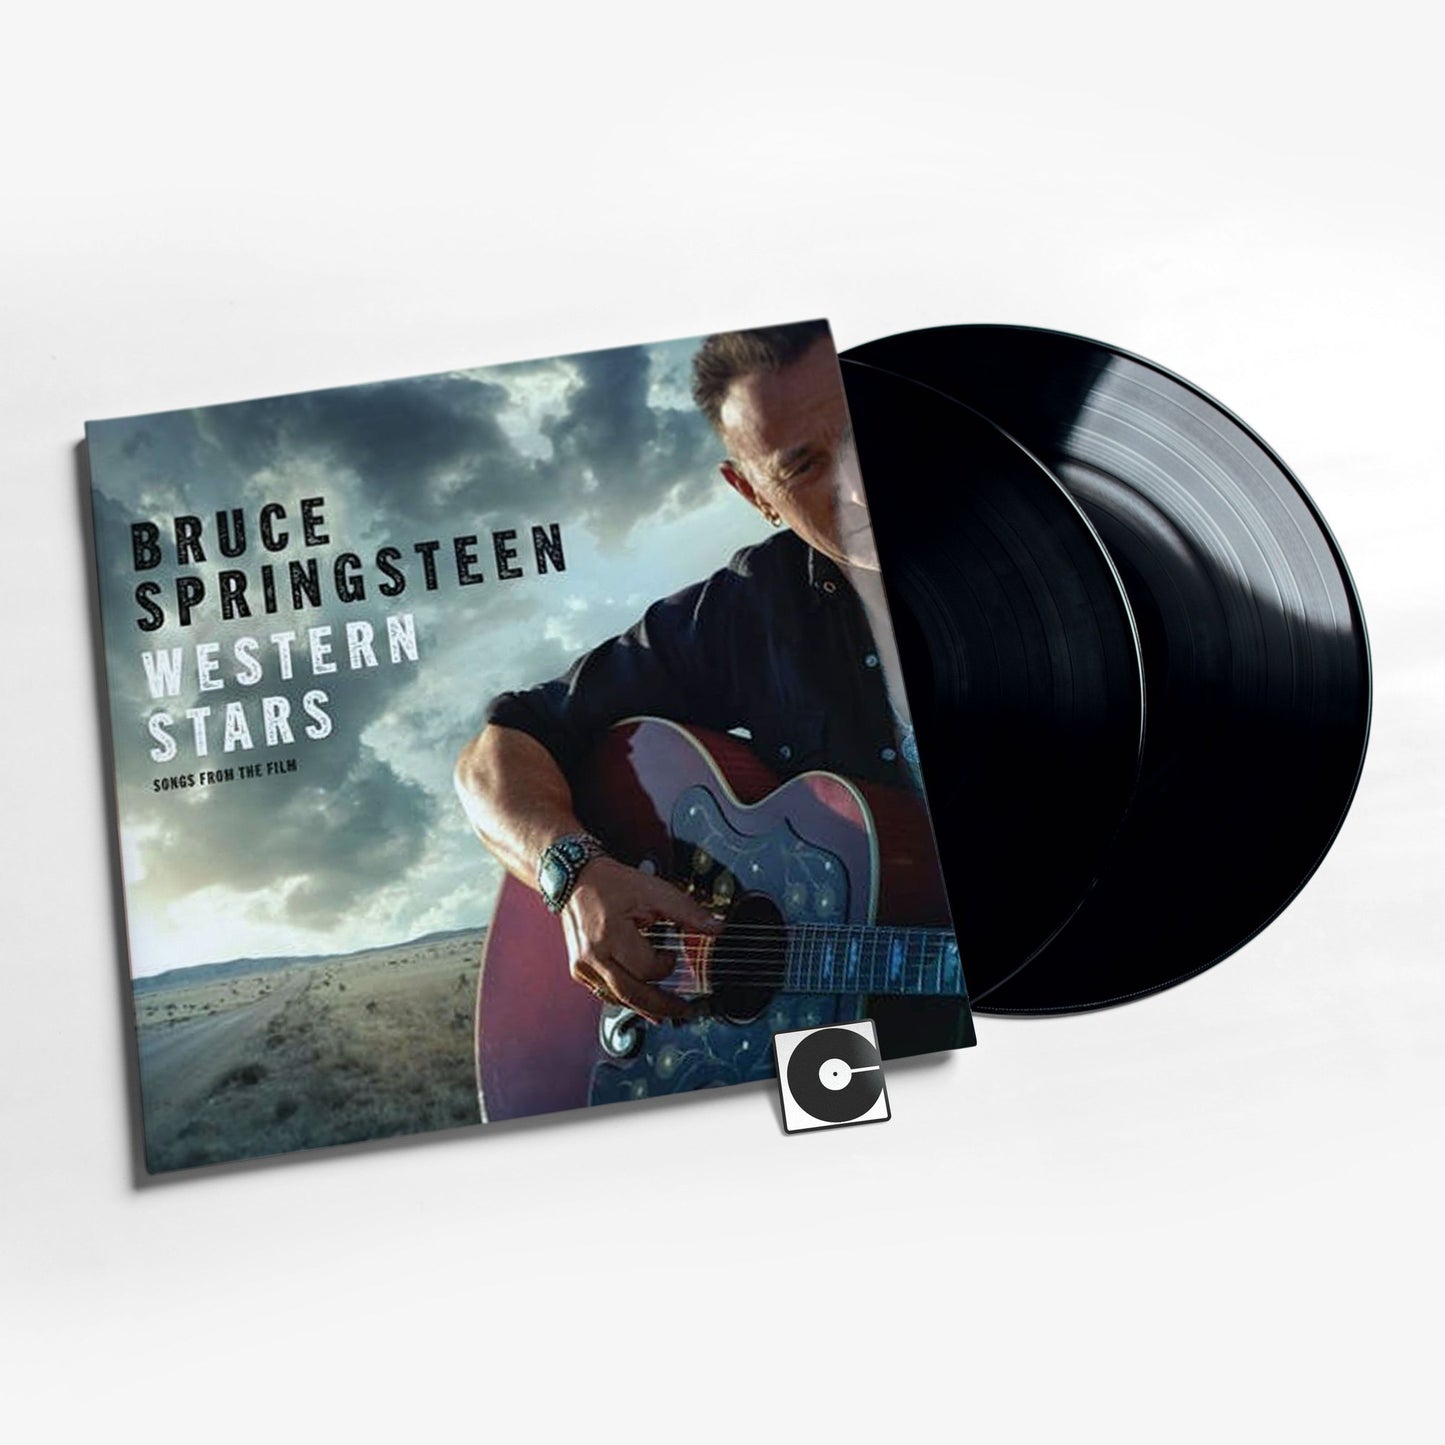 Bruce Springsteen - "Western Stars: Songs From The Film"